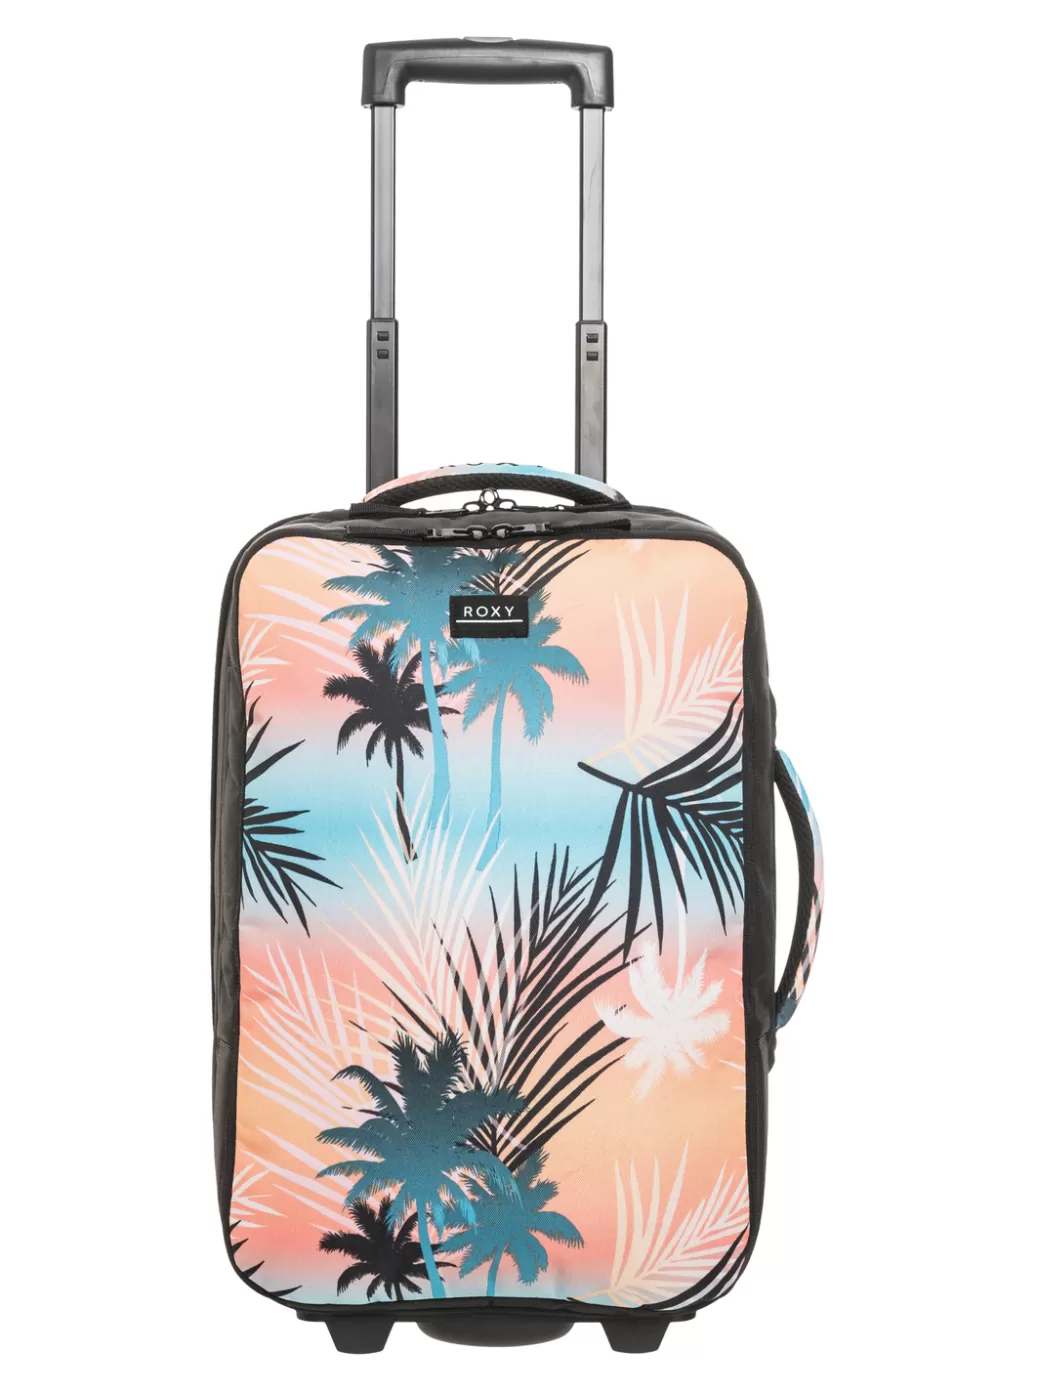 Other Accessories | WOMEN ROXY Get It Girl Small Wheeled Suitcase Bachelor Button Palm Beach